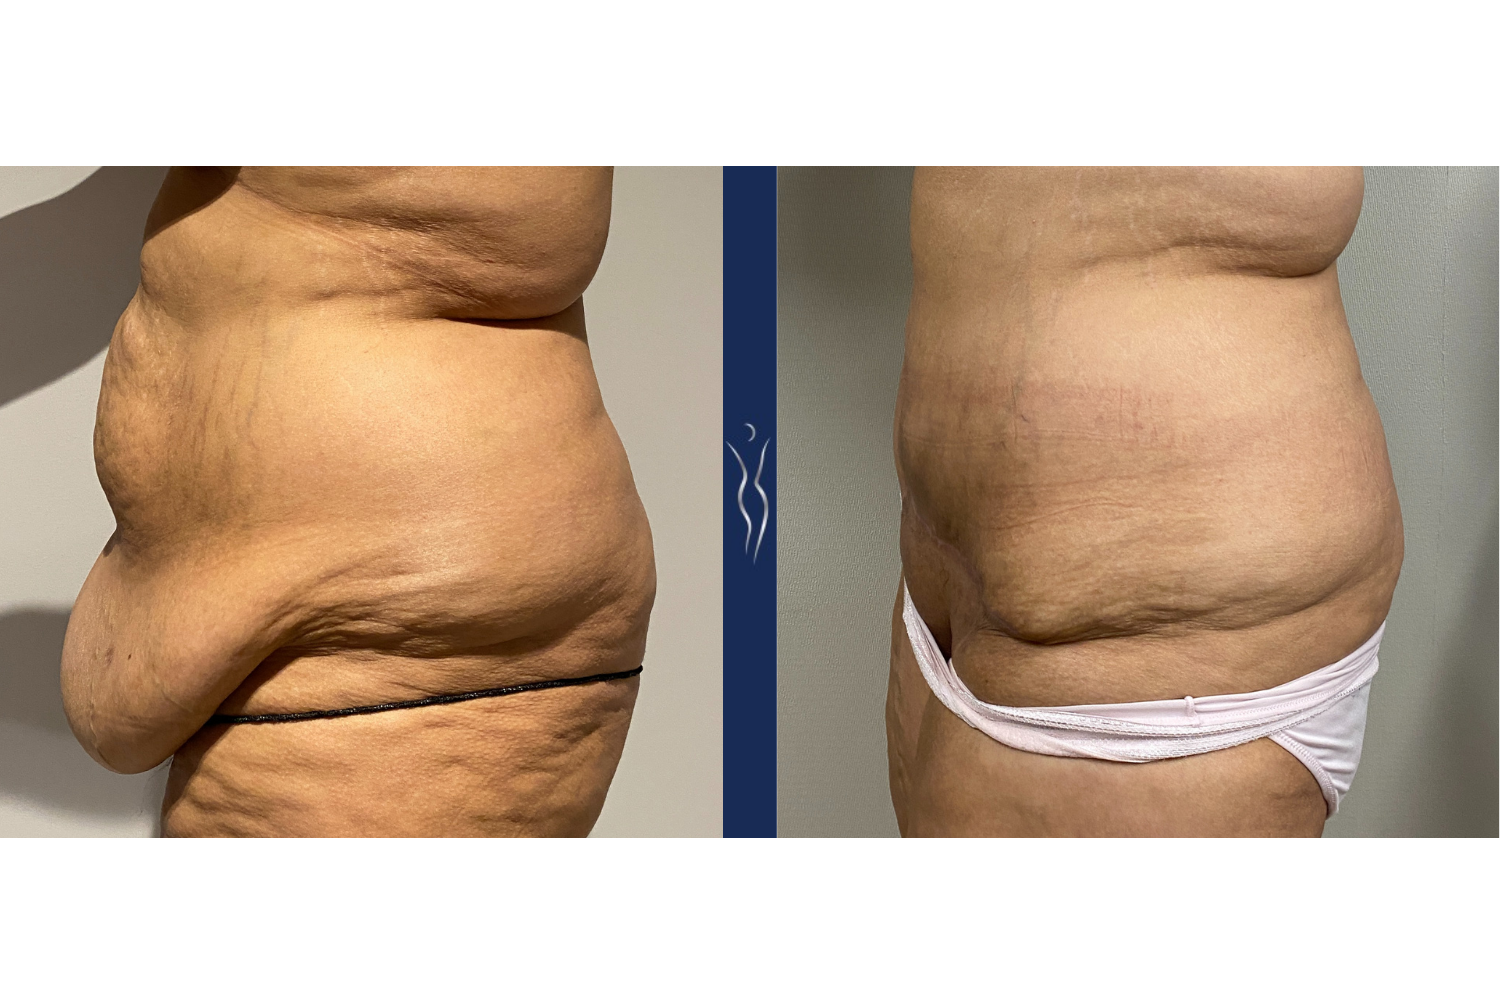 Panniculectomy vs. Tummy Tuck: What to Expect, Recovery, Costs